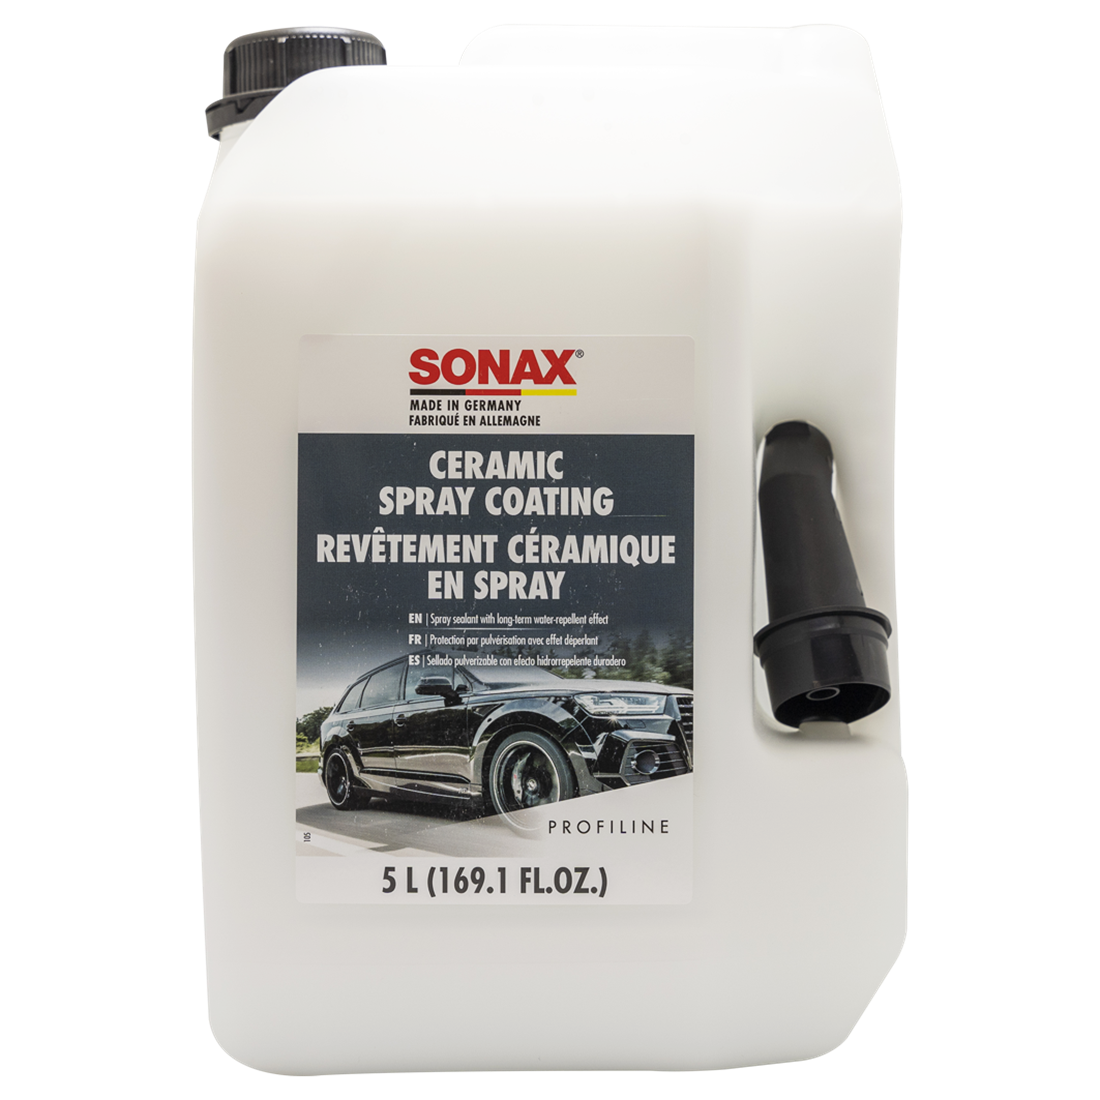 Sonax » Now in Canadian Tire